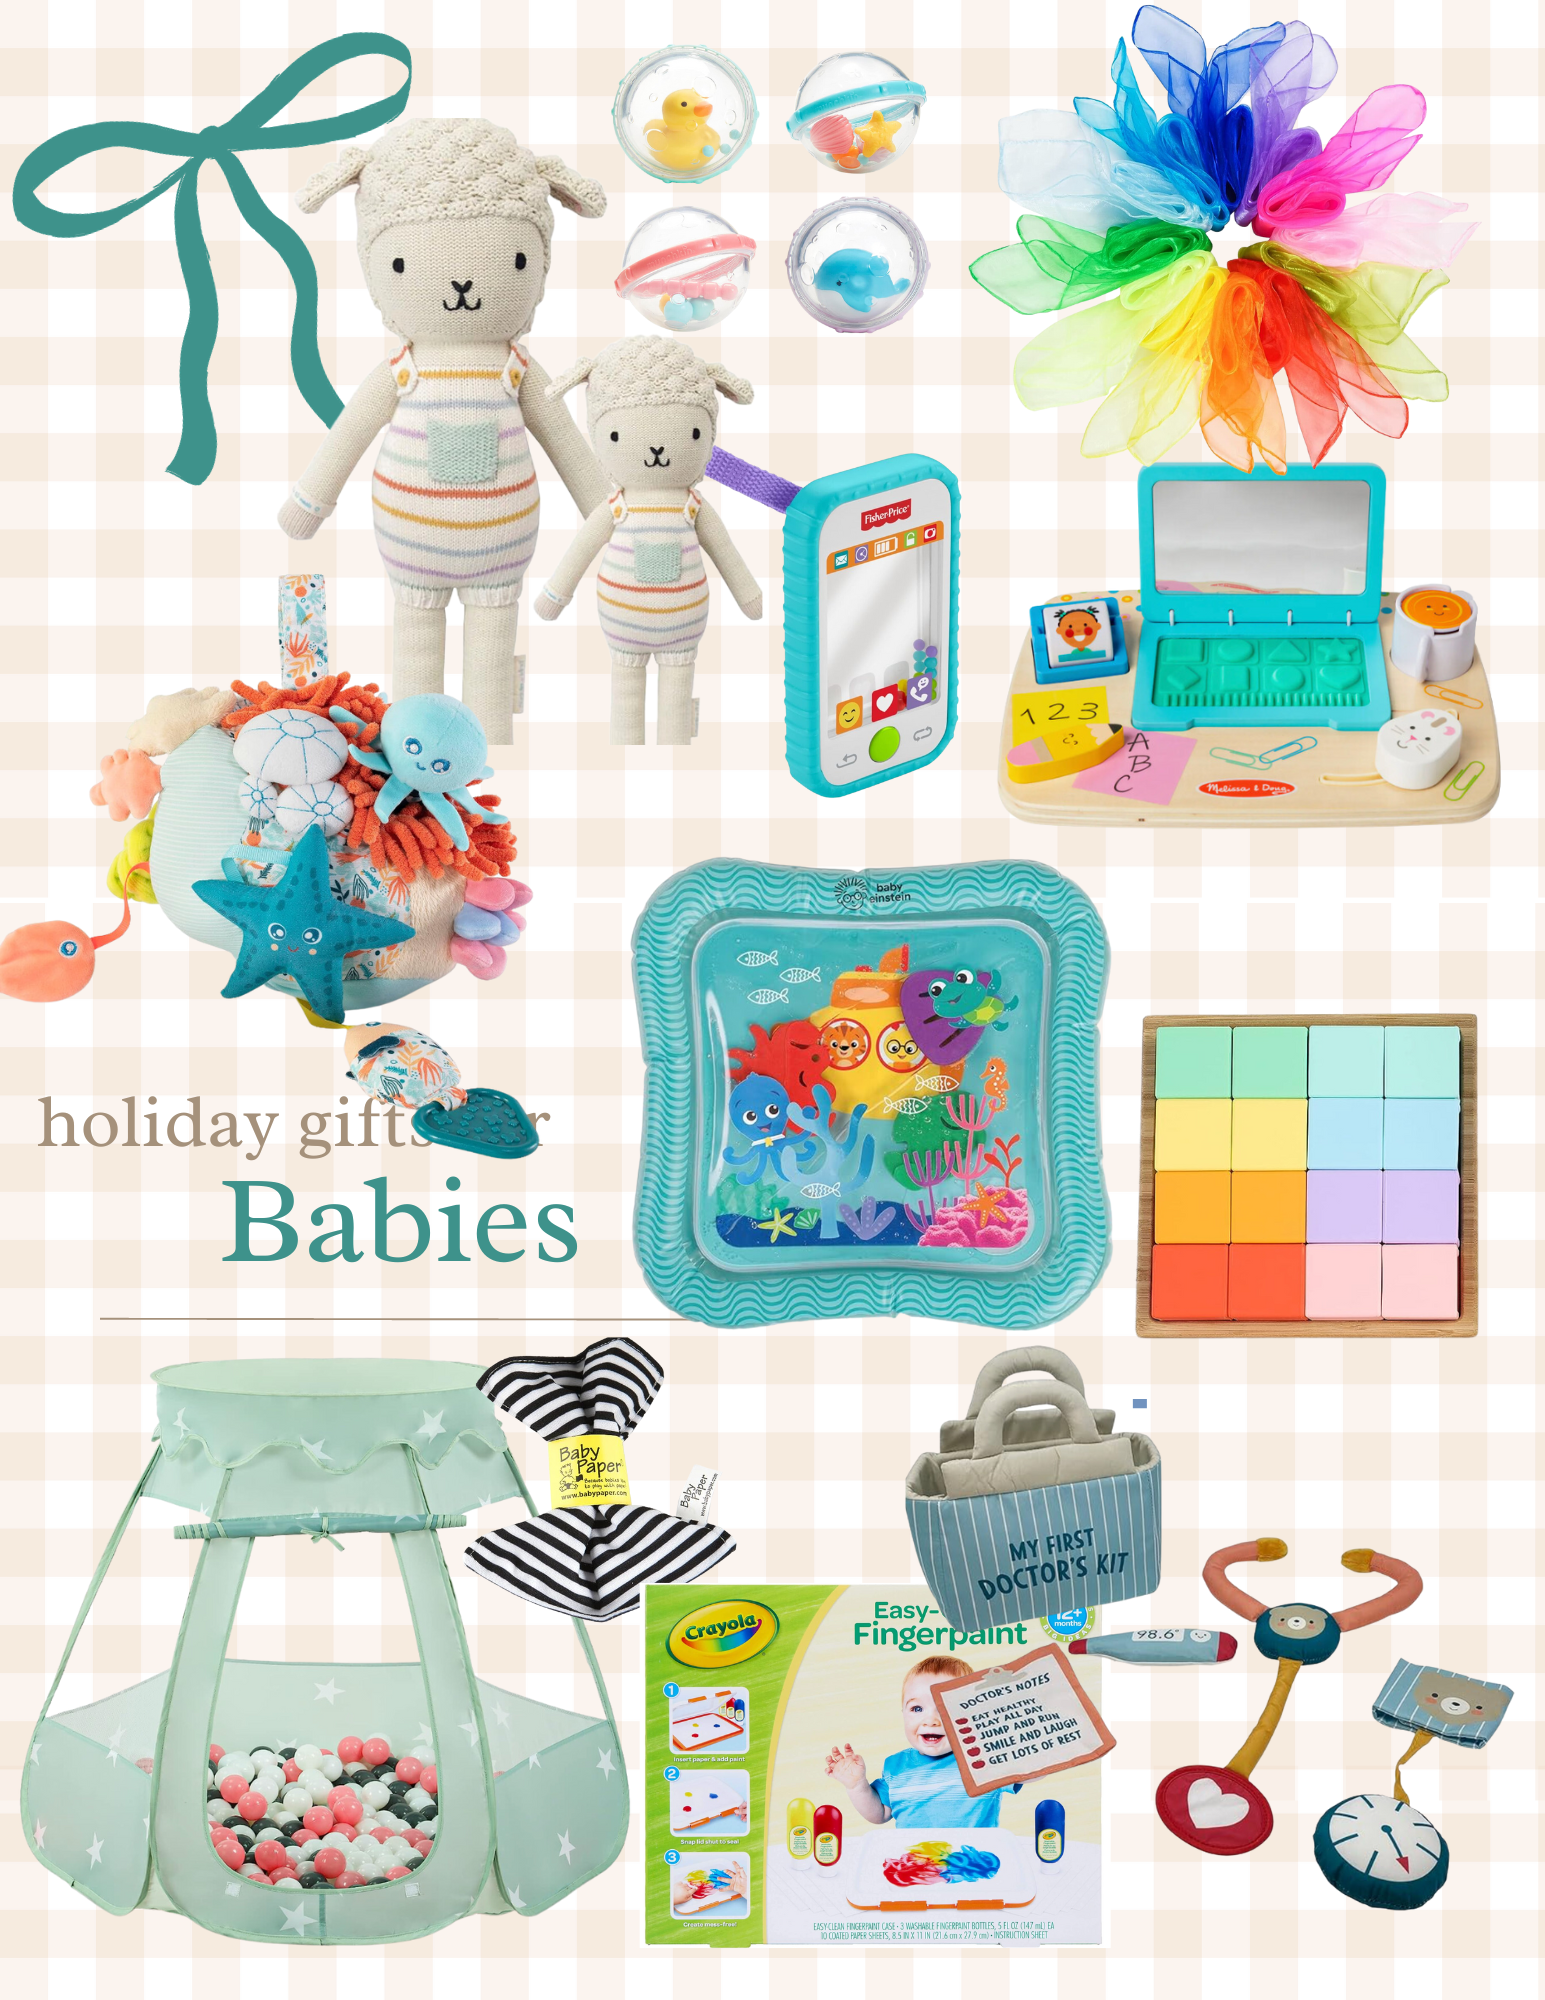 Best Gift Ideas for Preschoolers: Holiday Gift Guide